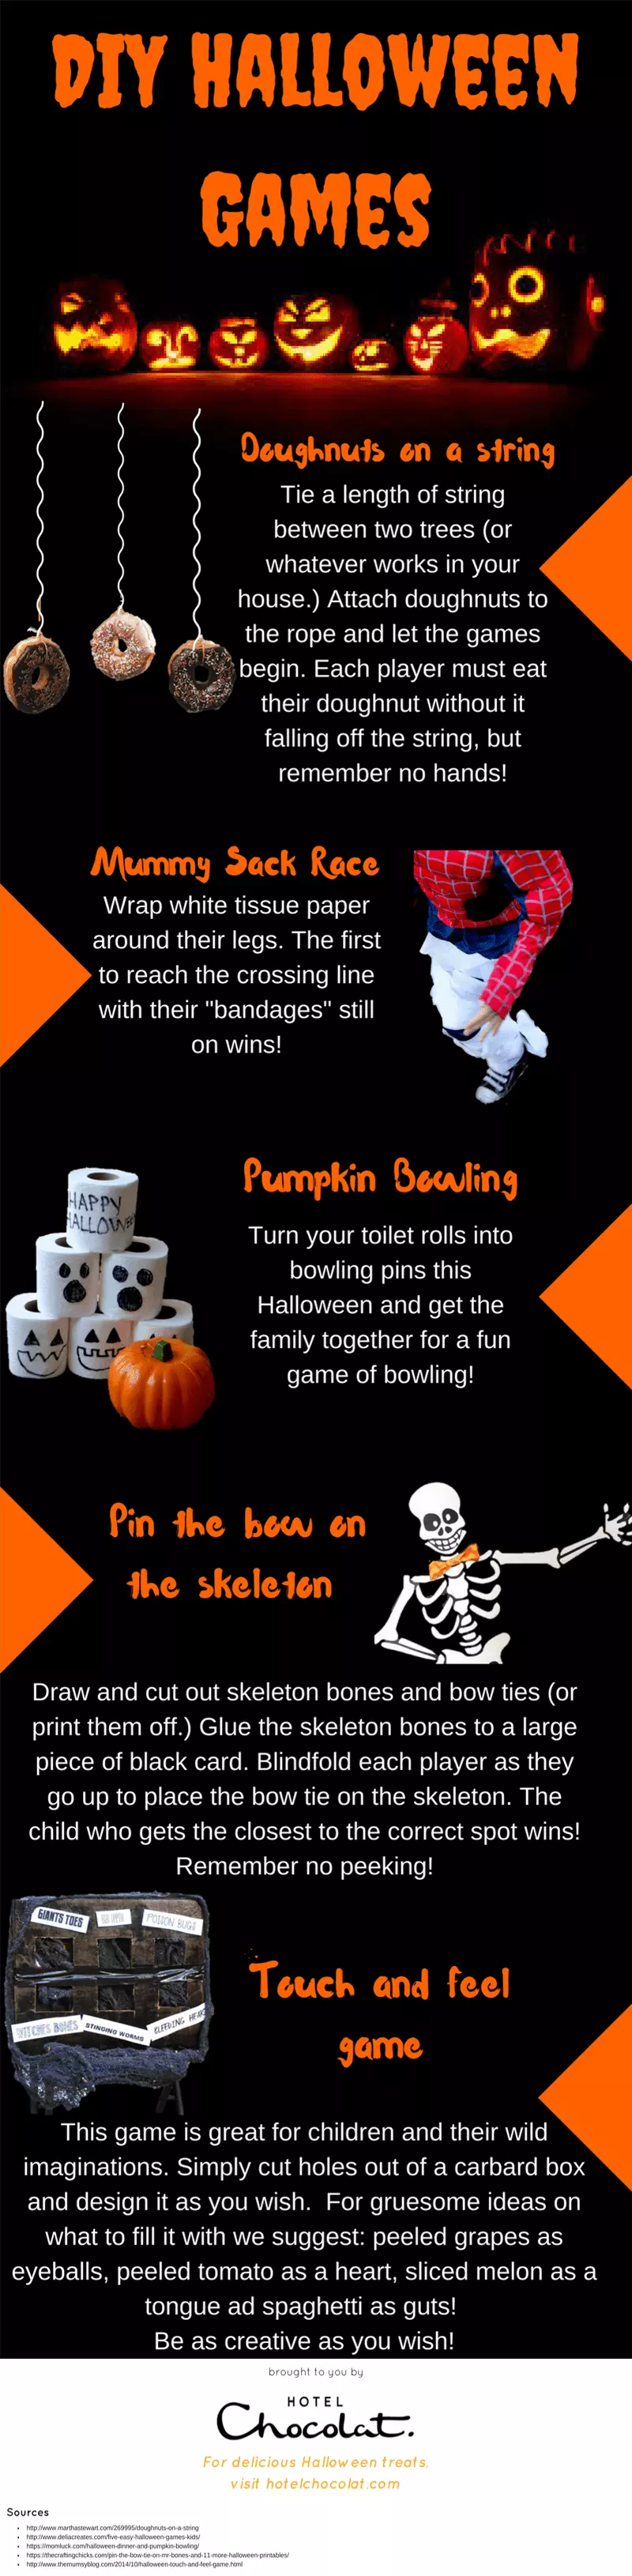 EASY KIDS HALLOWEEN PARTY - How To Throw a Spooktacular Kids Halloween Party